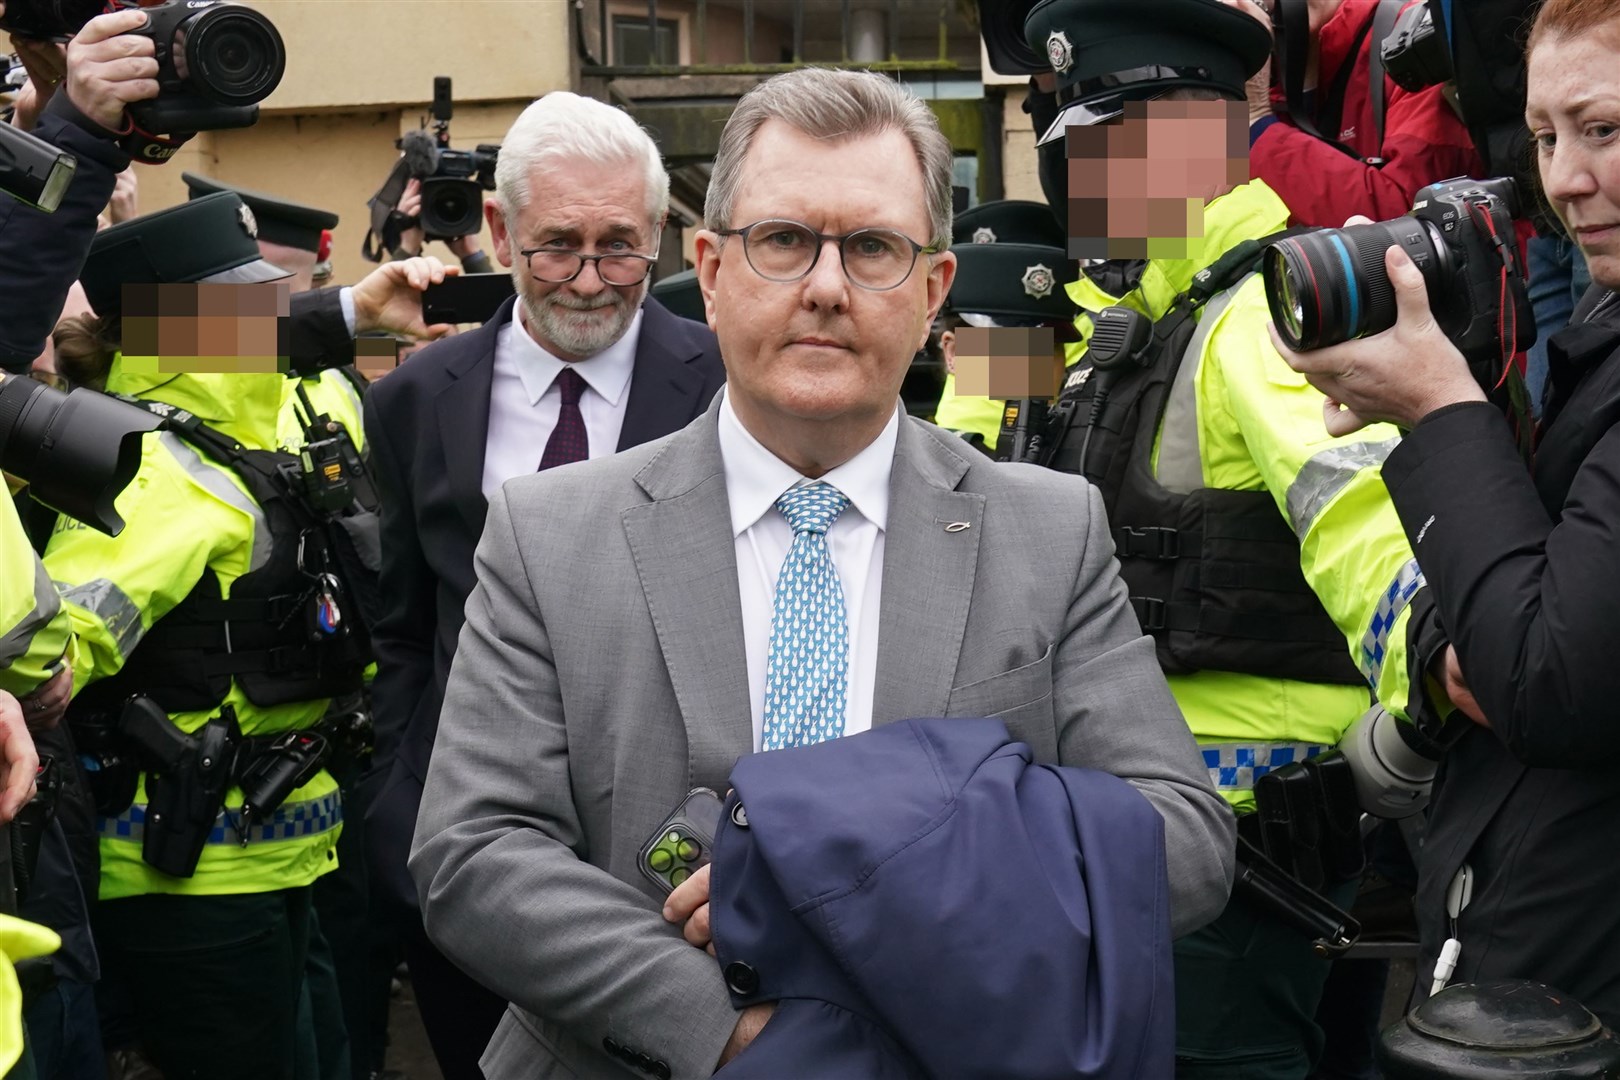 Sir Jeffrey Donaldson was released on continuing bail on a number of historical sex charges (Brian Lawless/PA)